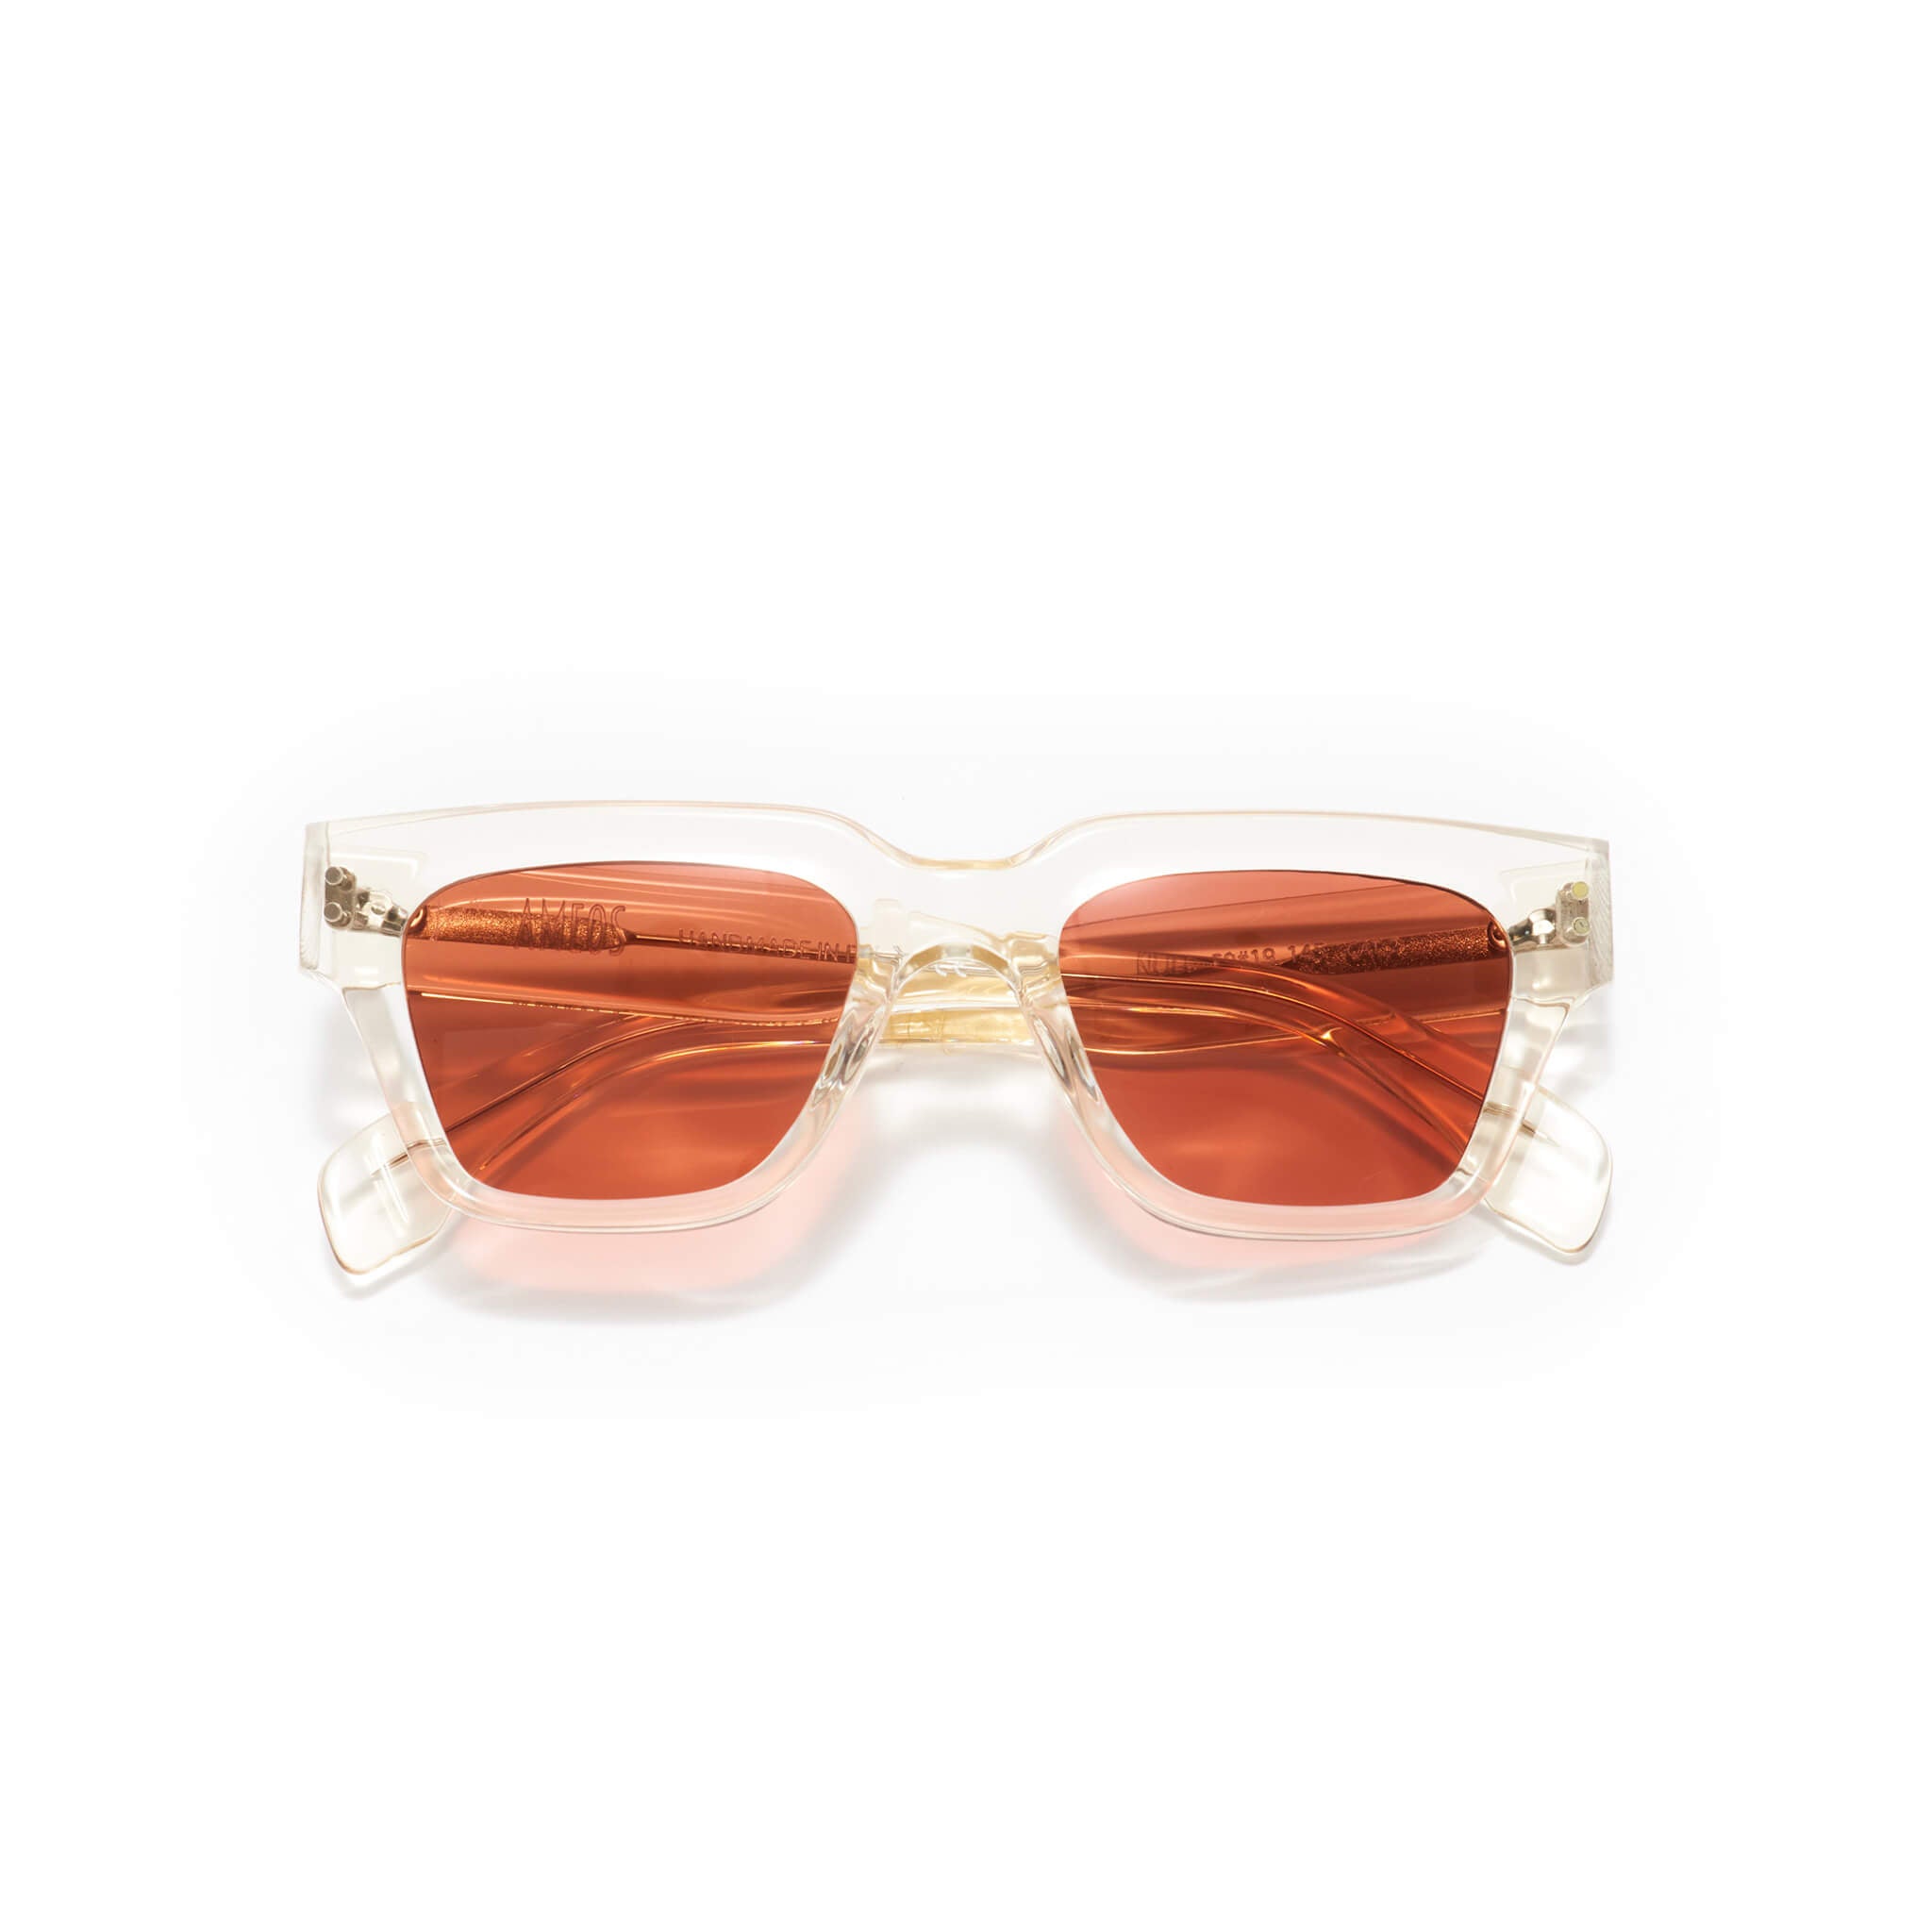 Transparent frames sunglasses with red lenses handmade in italy